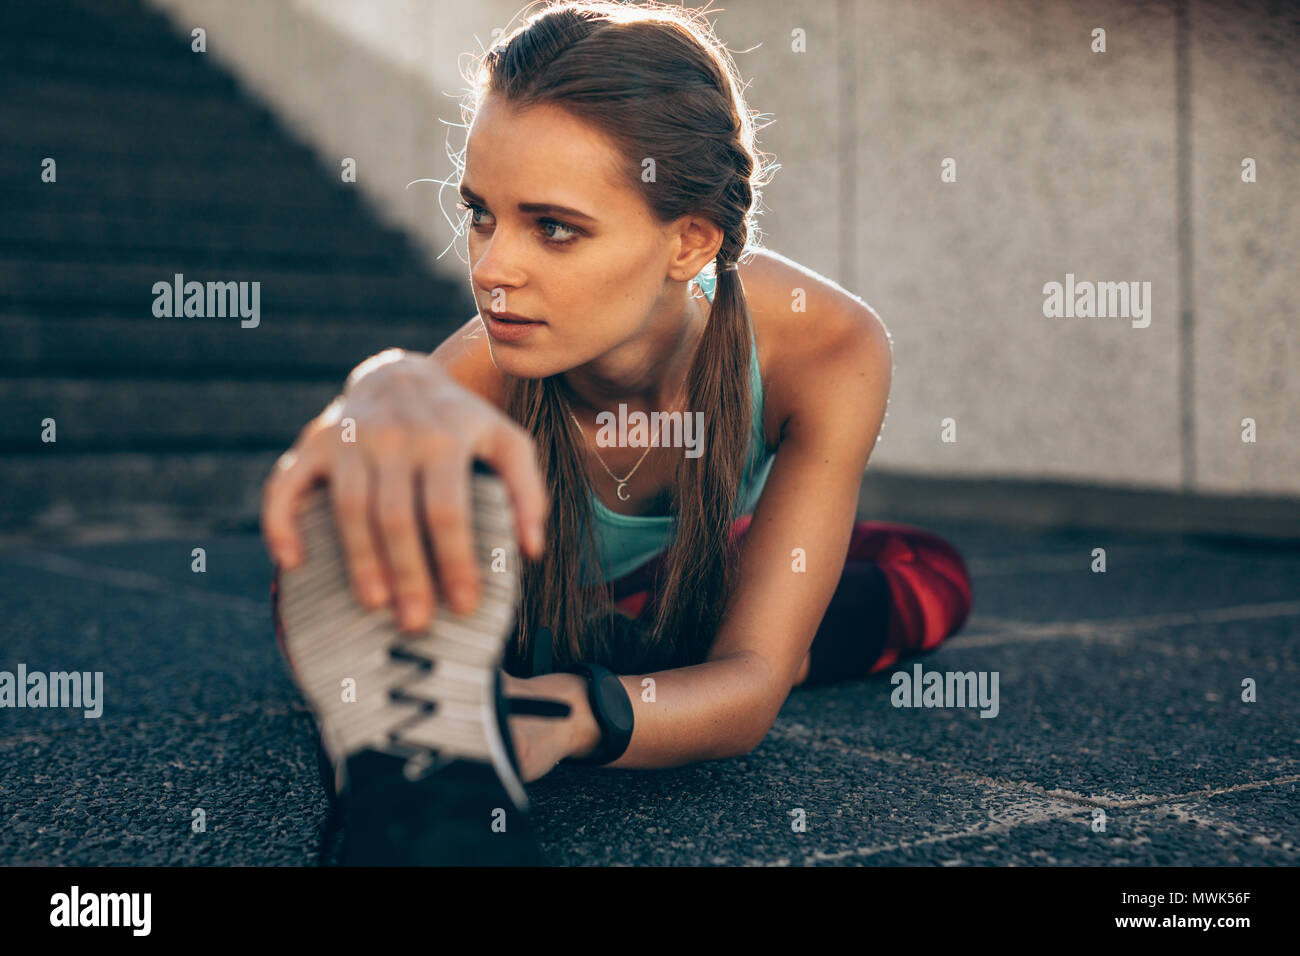 Healthy young woman exercising outdoors. Fit young woman doing stretching workout in morning. Stock Photo